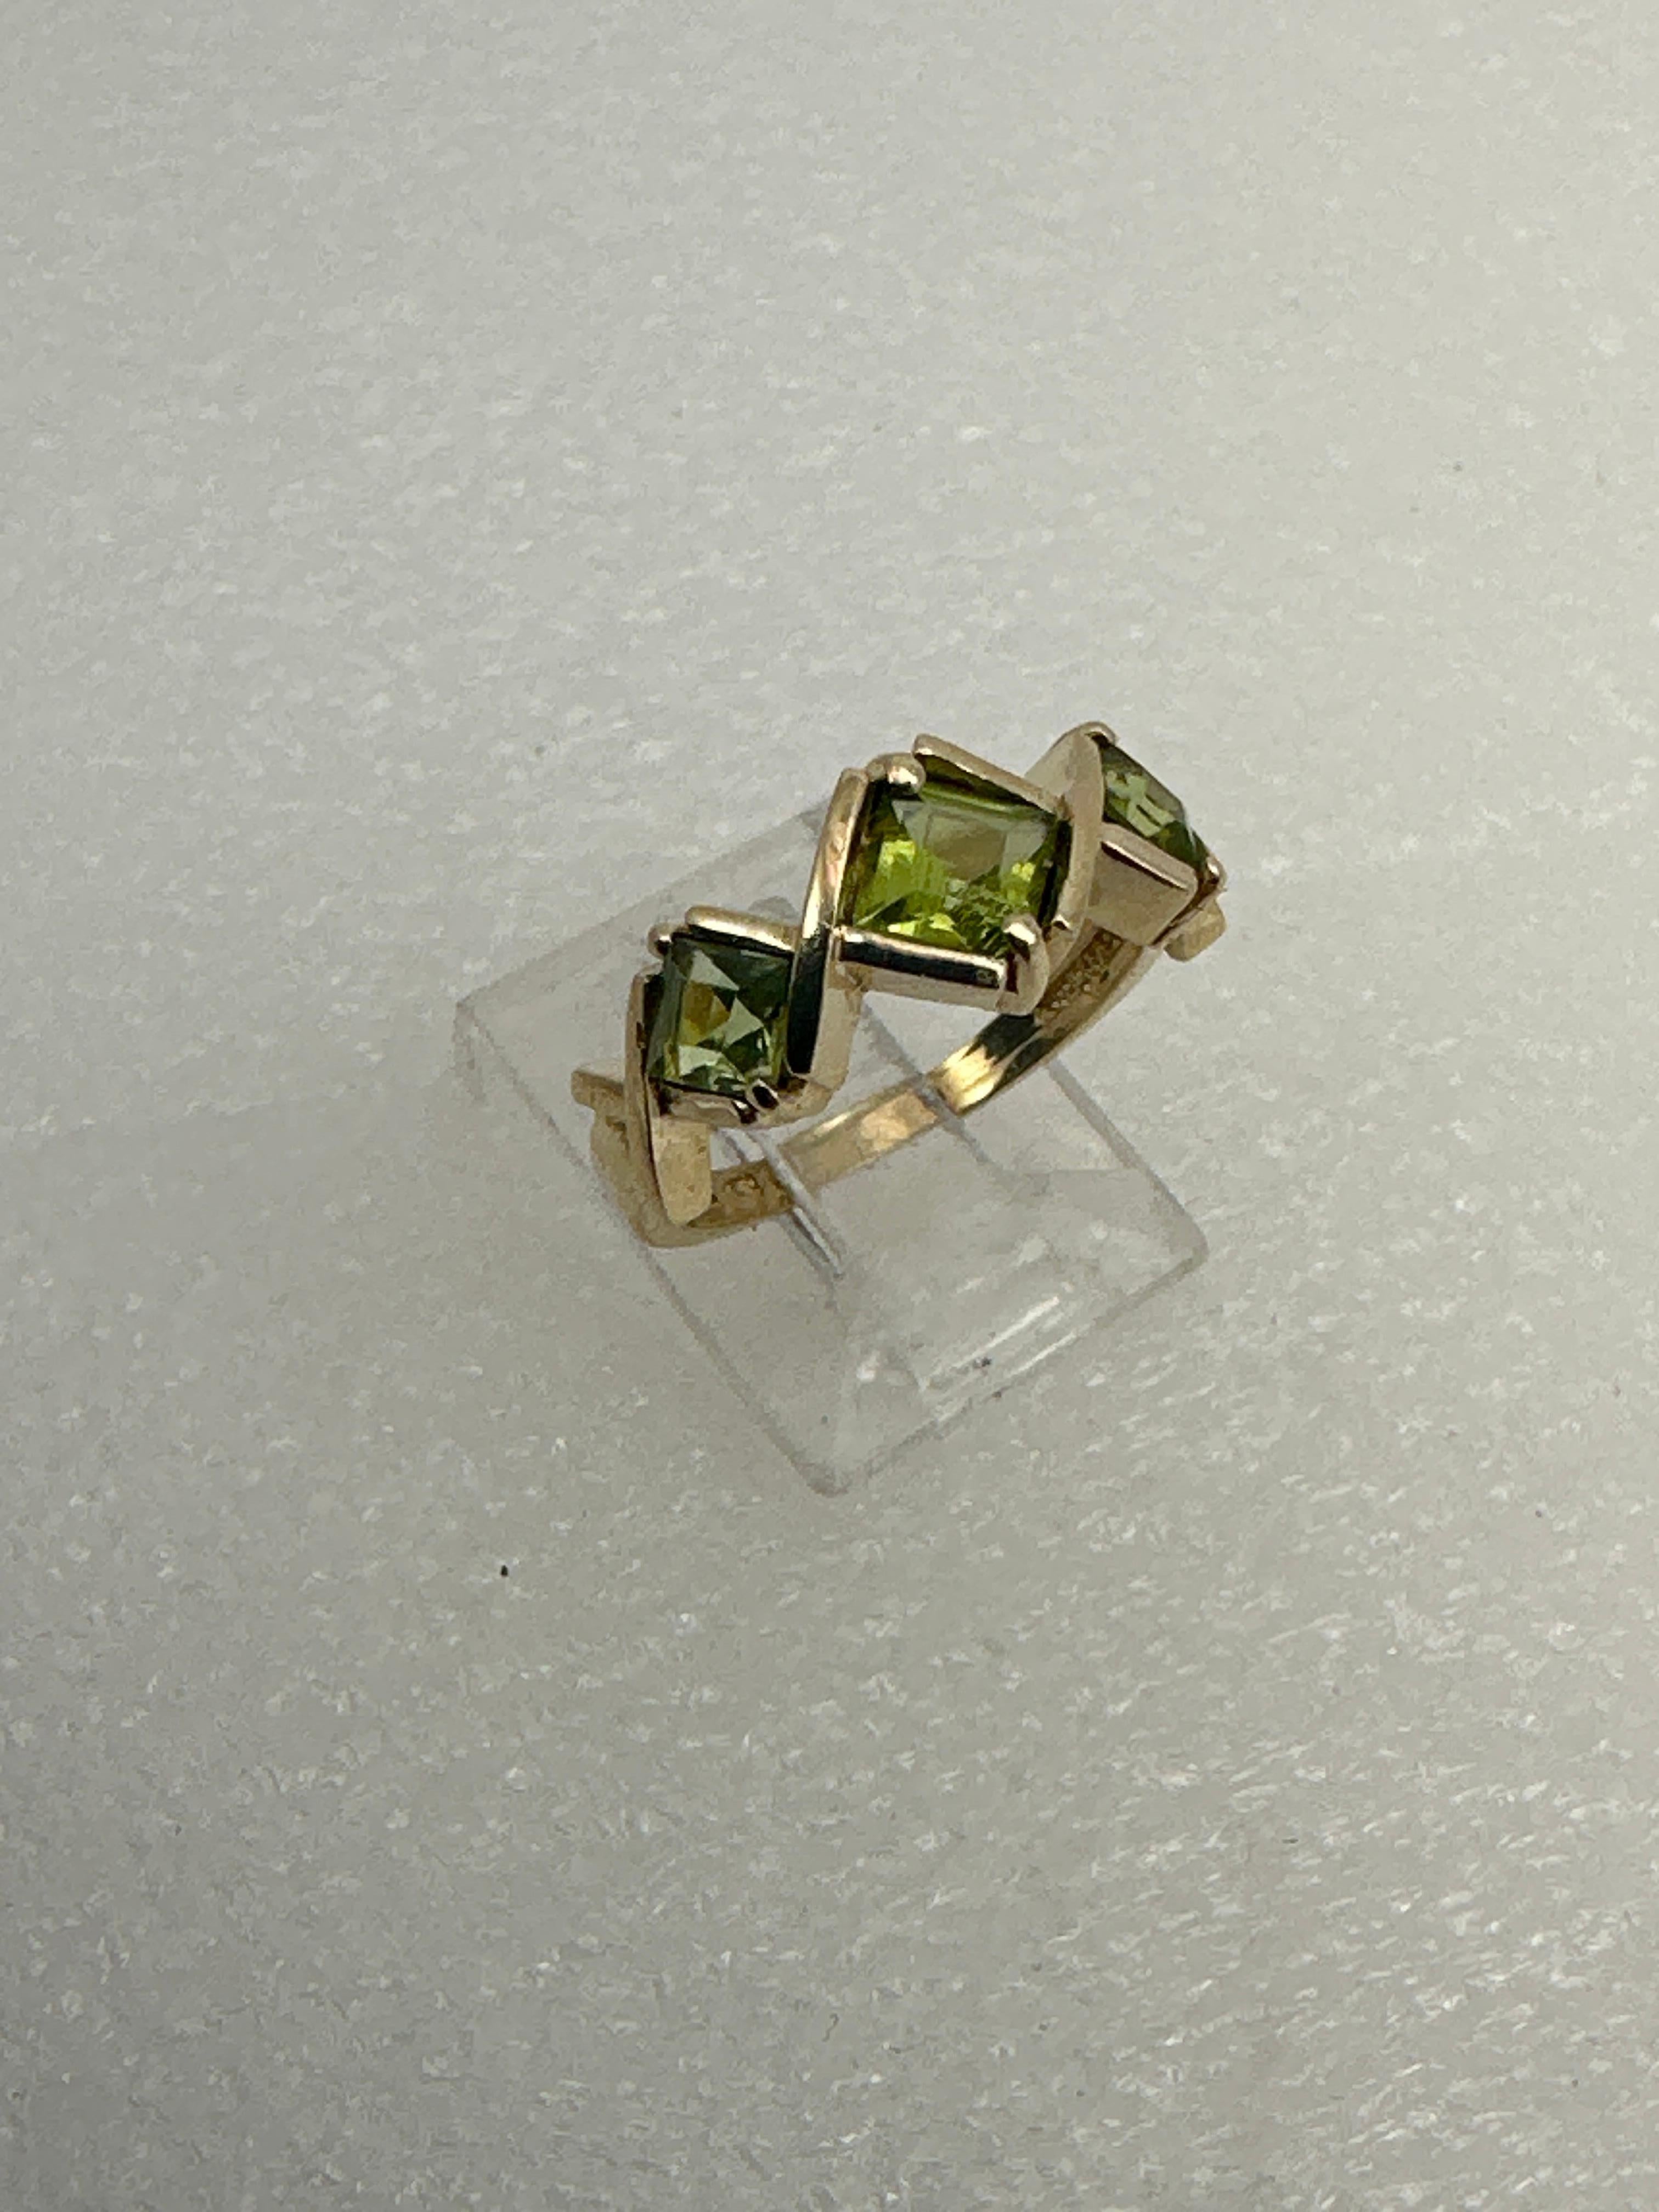 14k Yellow Gold ~ 4.5mm & 5.5mm Square Peridot Ring ~ Size 7

Center Stone measure approx 5.5mm
2 Side stones measure approx 4.5mm

Peridot, the birthstone for the month of August, is also given in celebration of the 16th year of marriage. Known as